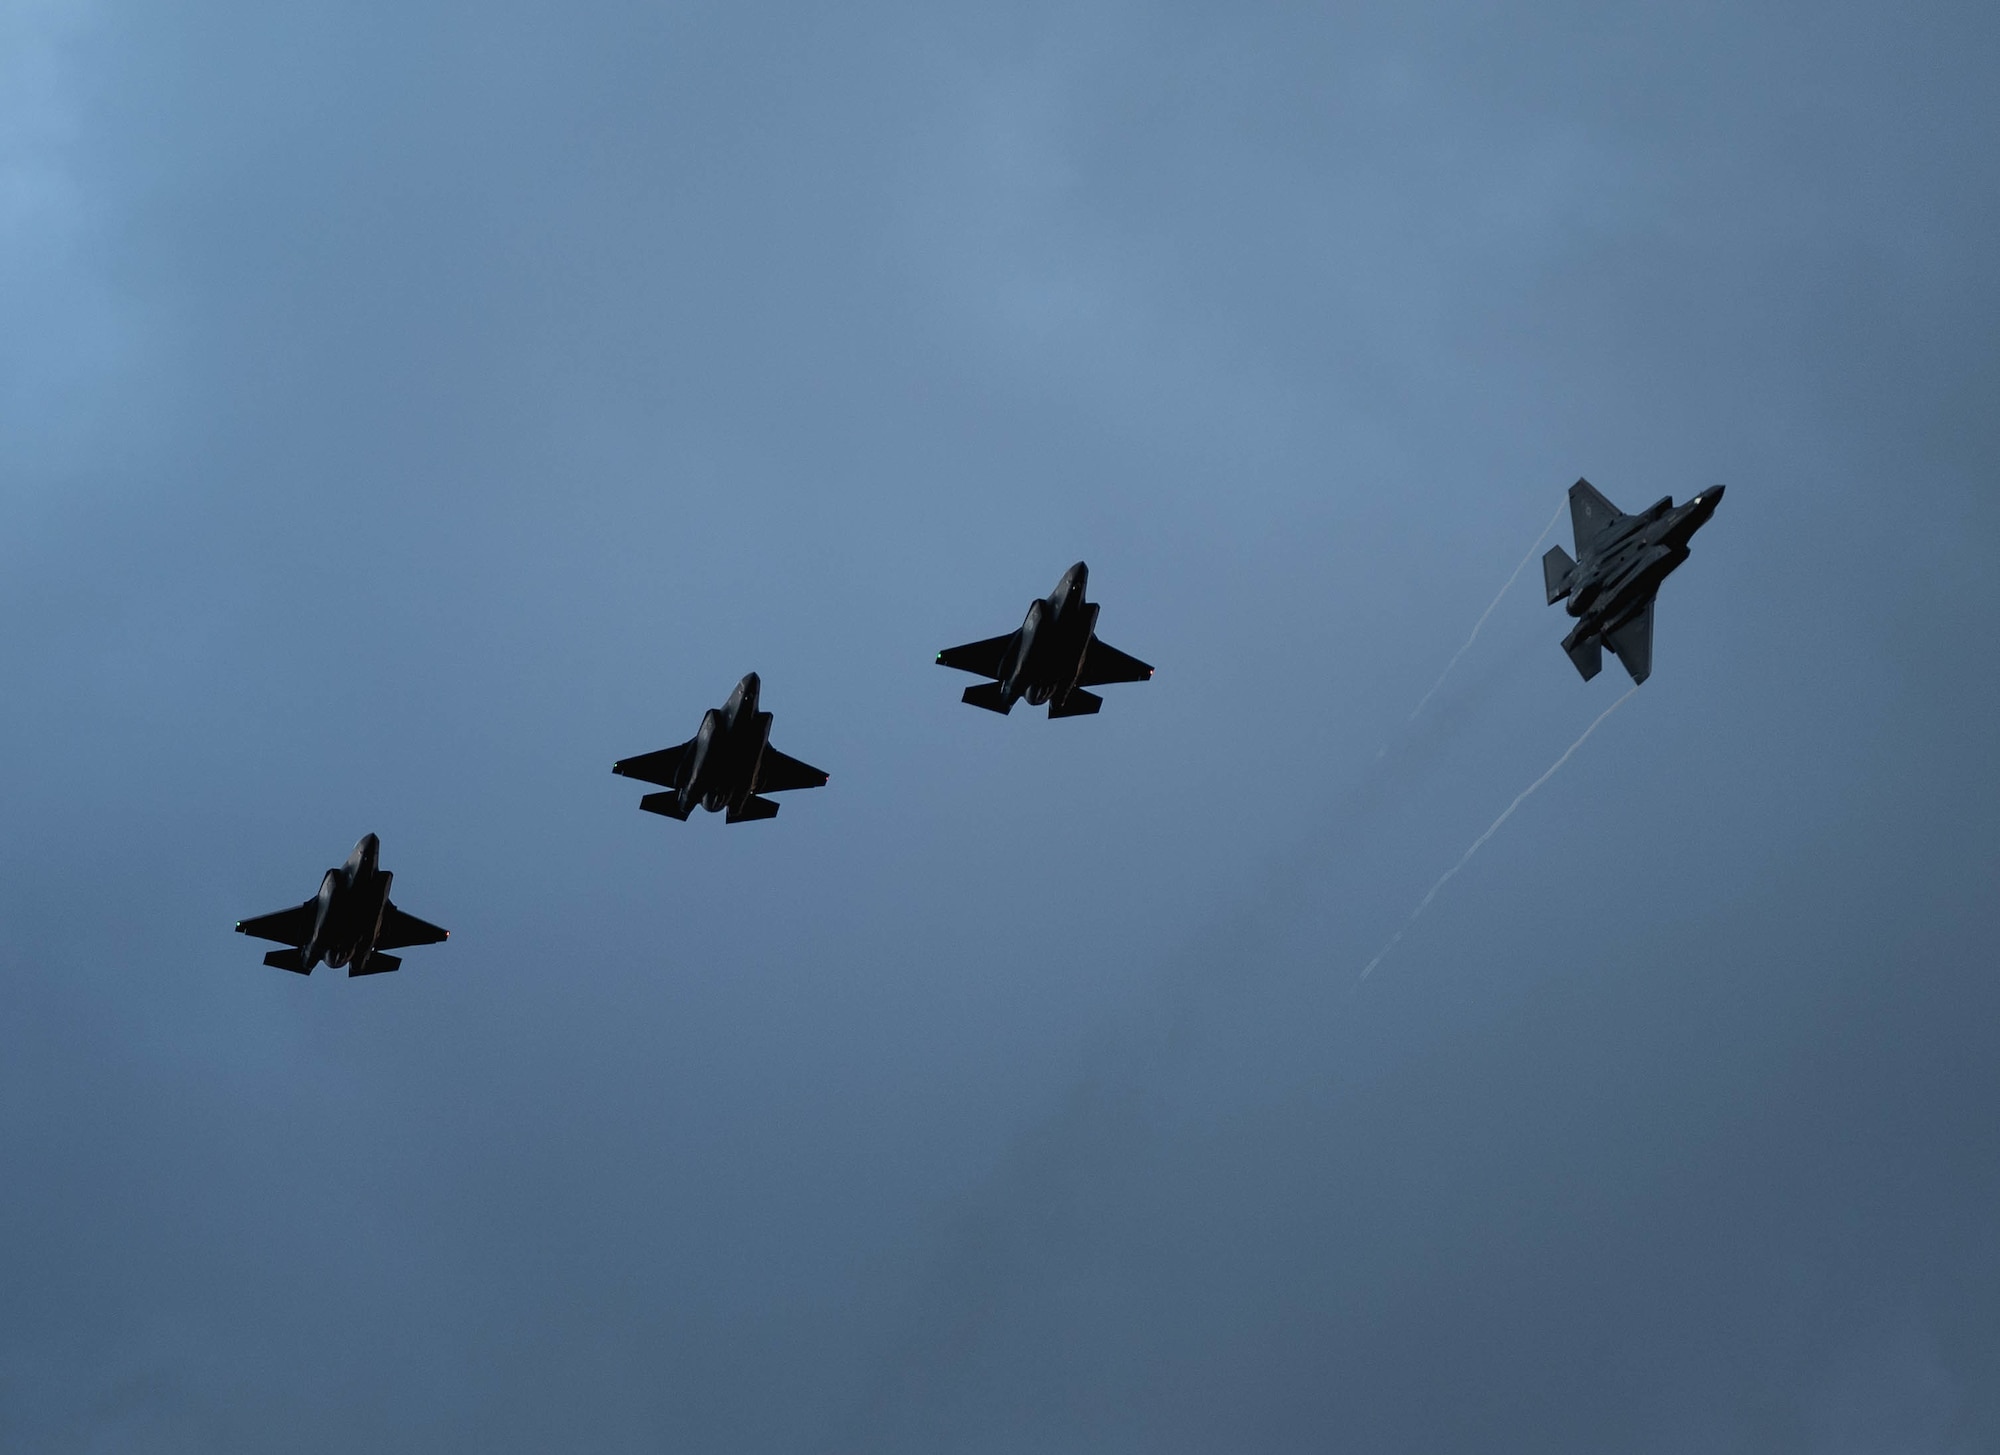 Four U.S. Air Force F-35A Lightning IIs assigned to the 4th Fighter Squadron, Hill Air Force Base, Utah, fly over Mont-de-Marsan Air Base, France, upon arrival May 10, 2021. During their time in the European theater, the 4th FS aircraft will participate in multiple events, including Atlantic Trident 21, underscoring the steadfast U.S. commitment to the region and enhancing interoperability with NATO allies and partners. (U.S. Air Force photo by Staff Sgt. Alexander Cook)